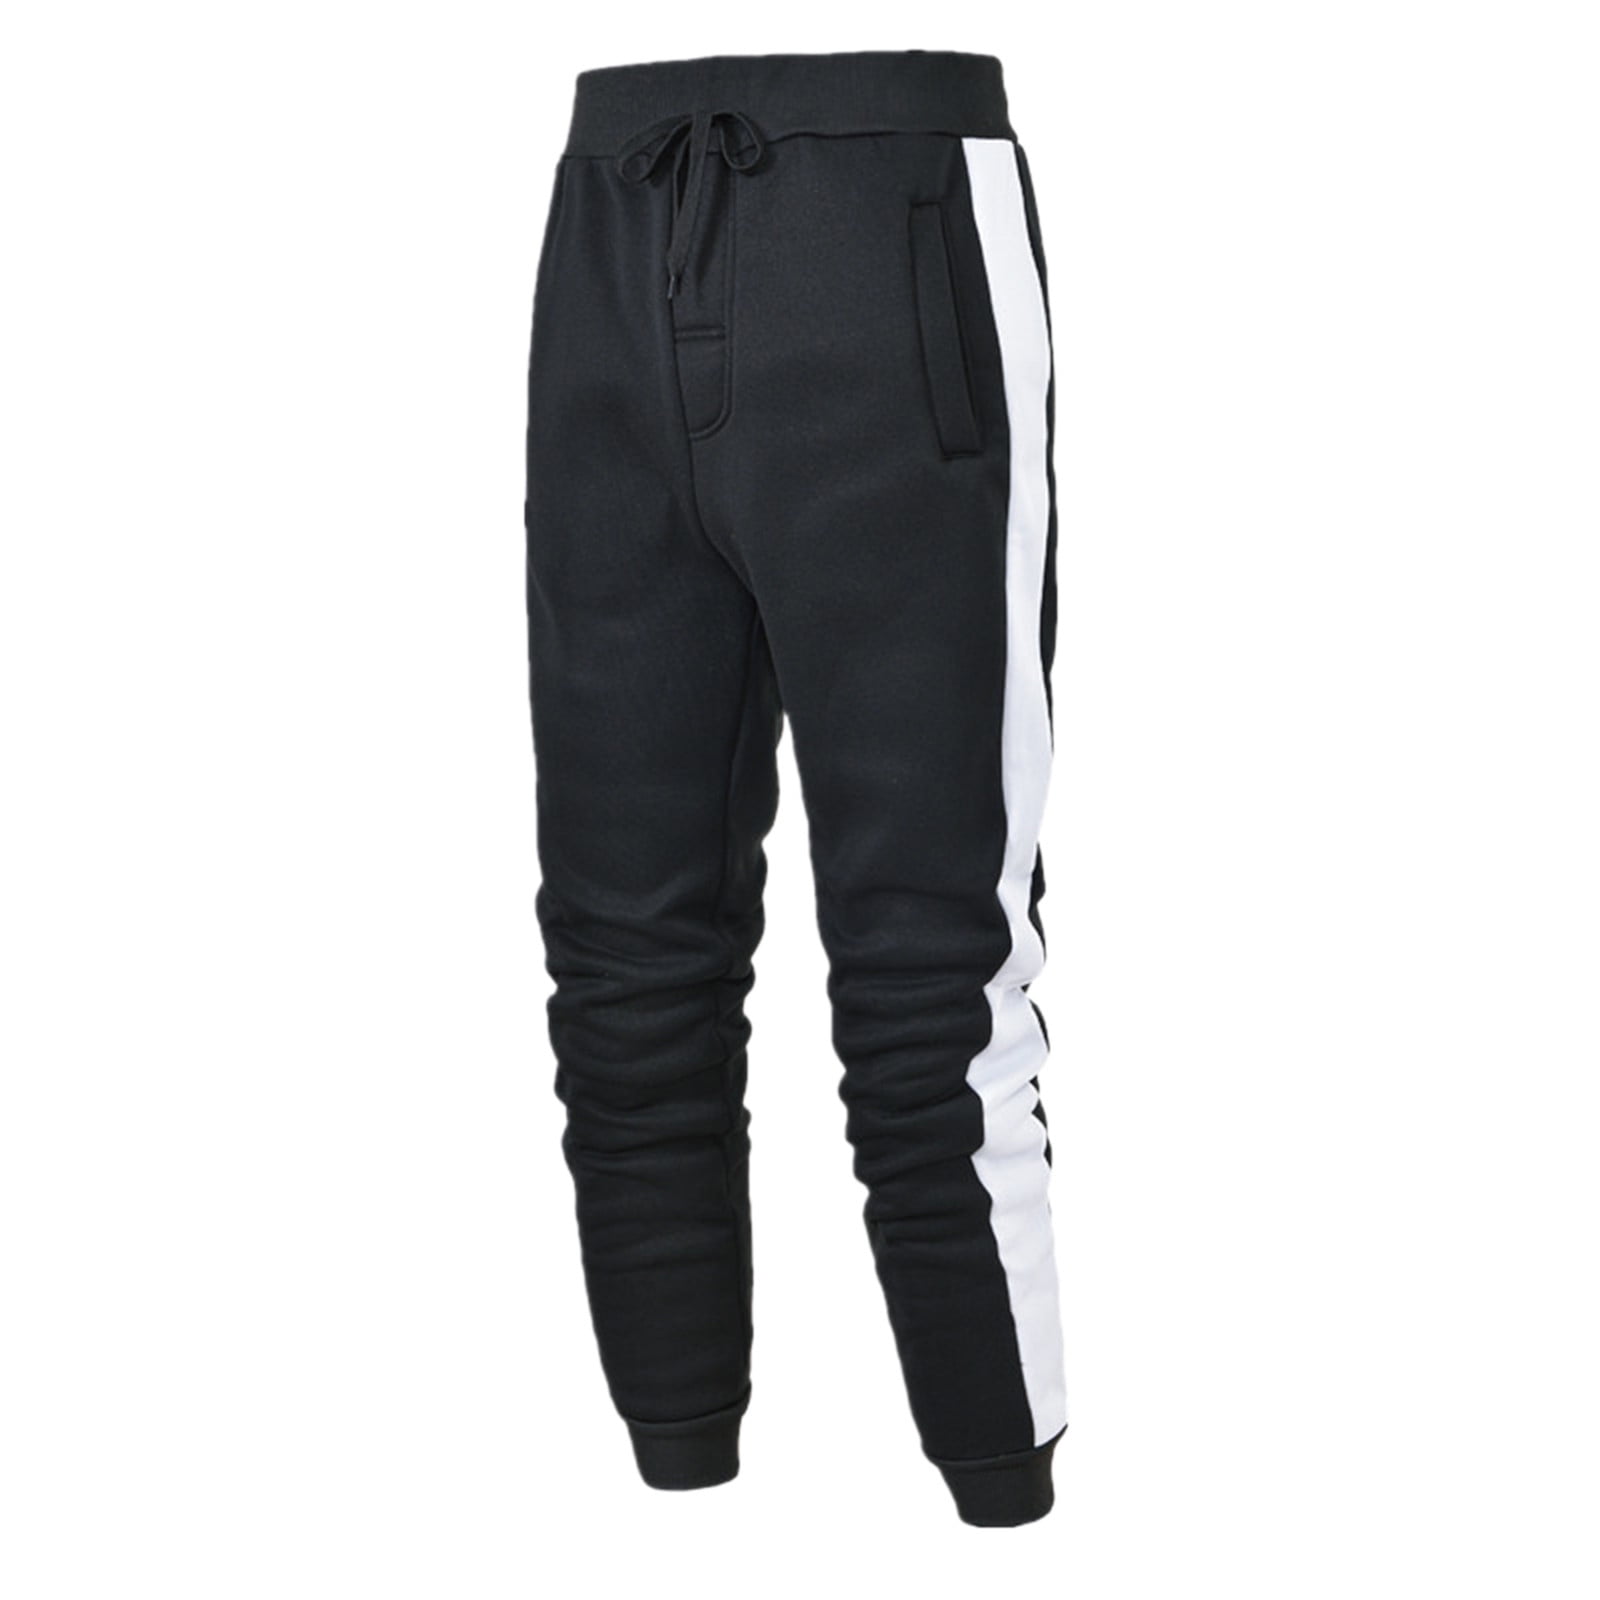 Men Hip Hop Pants Casual Spliced Solid Color Track Cuff Lace Up Workout ...